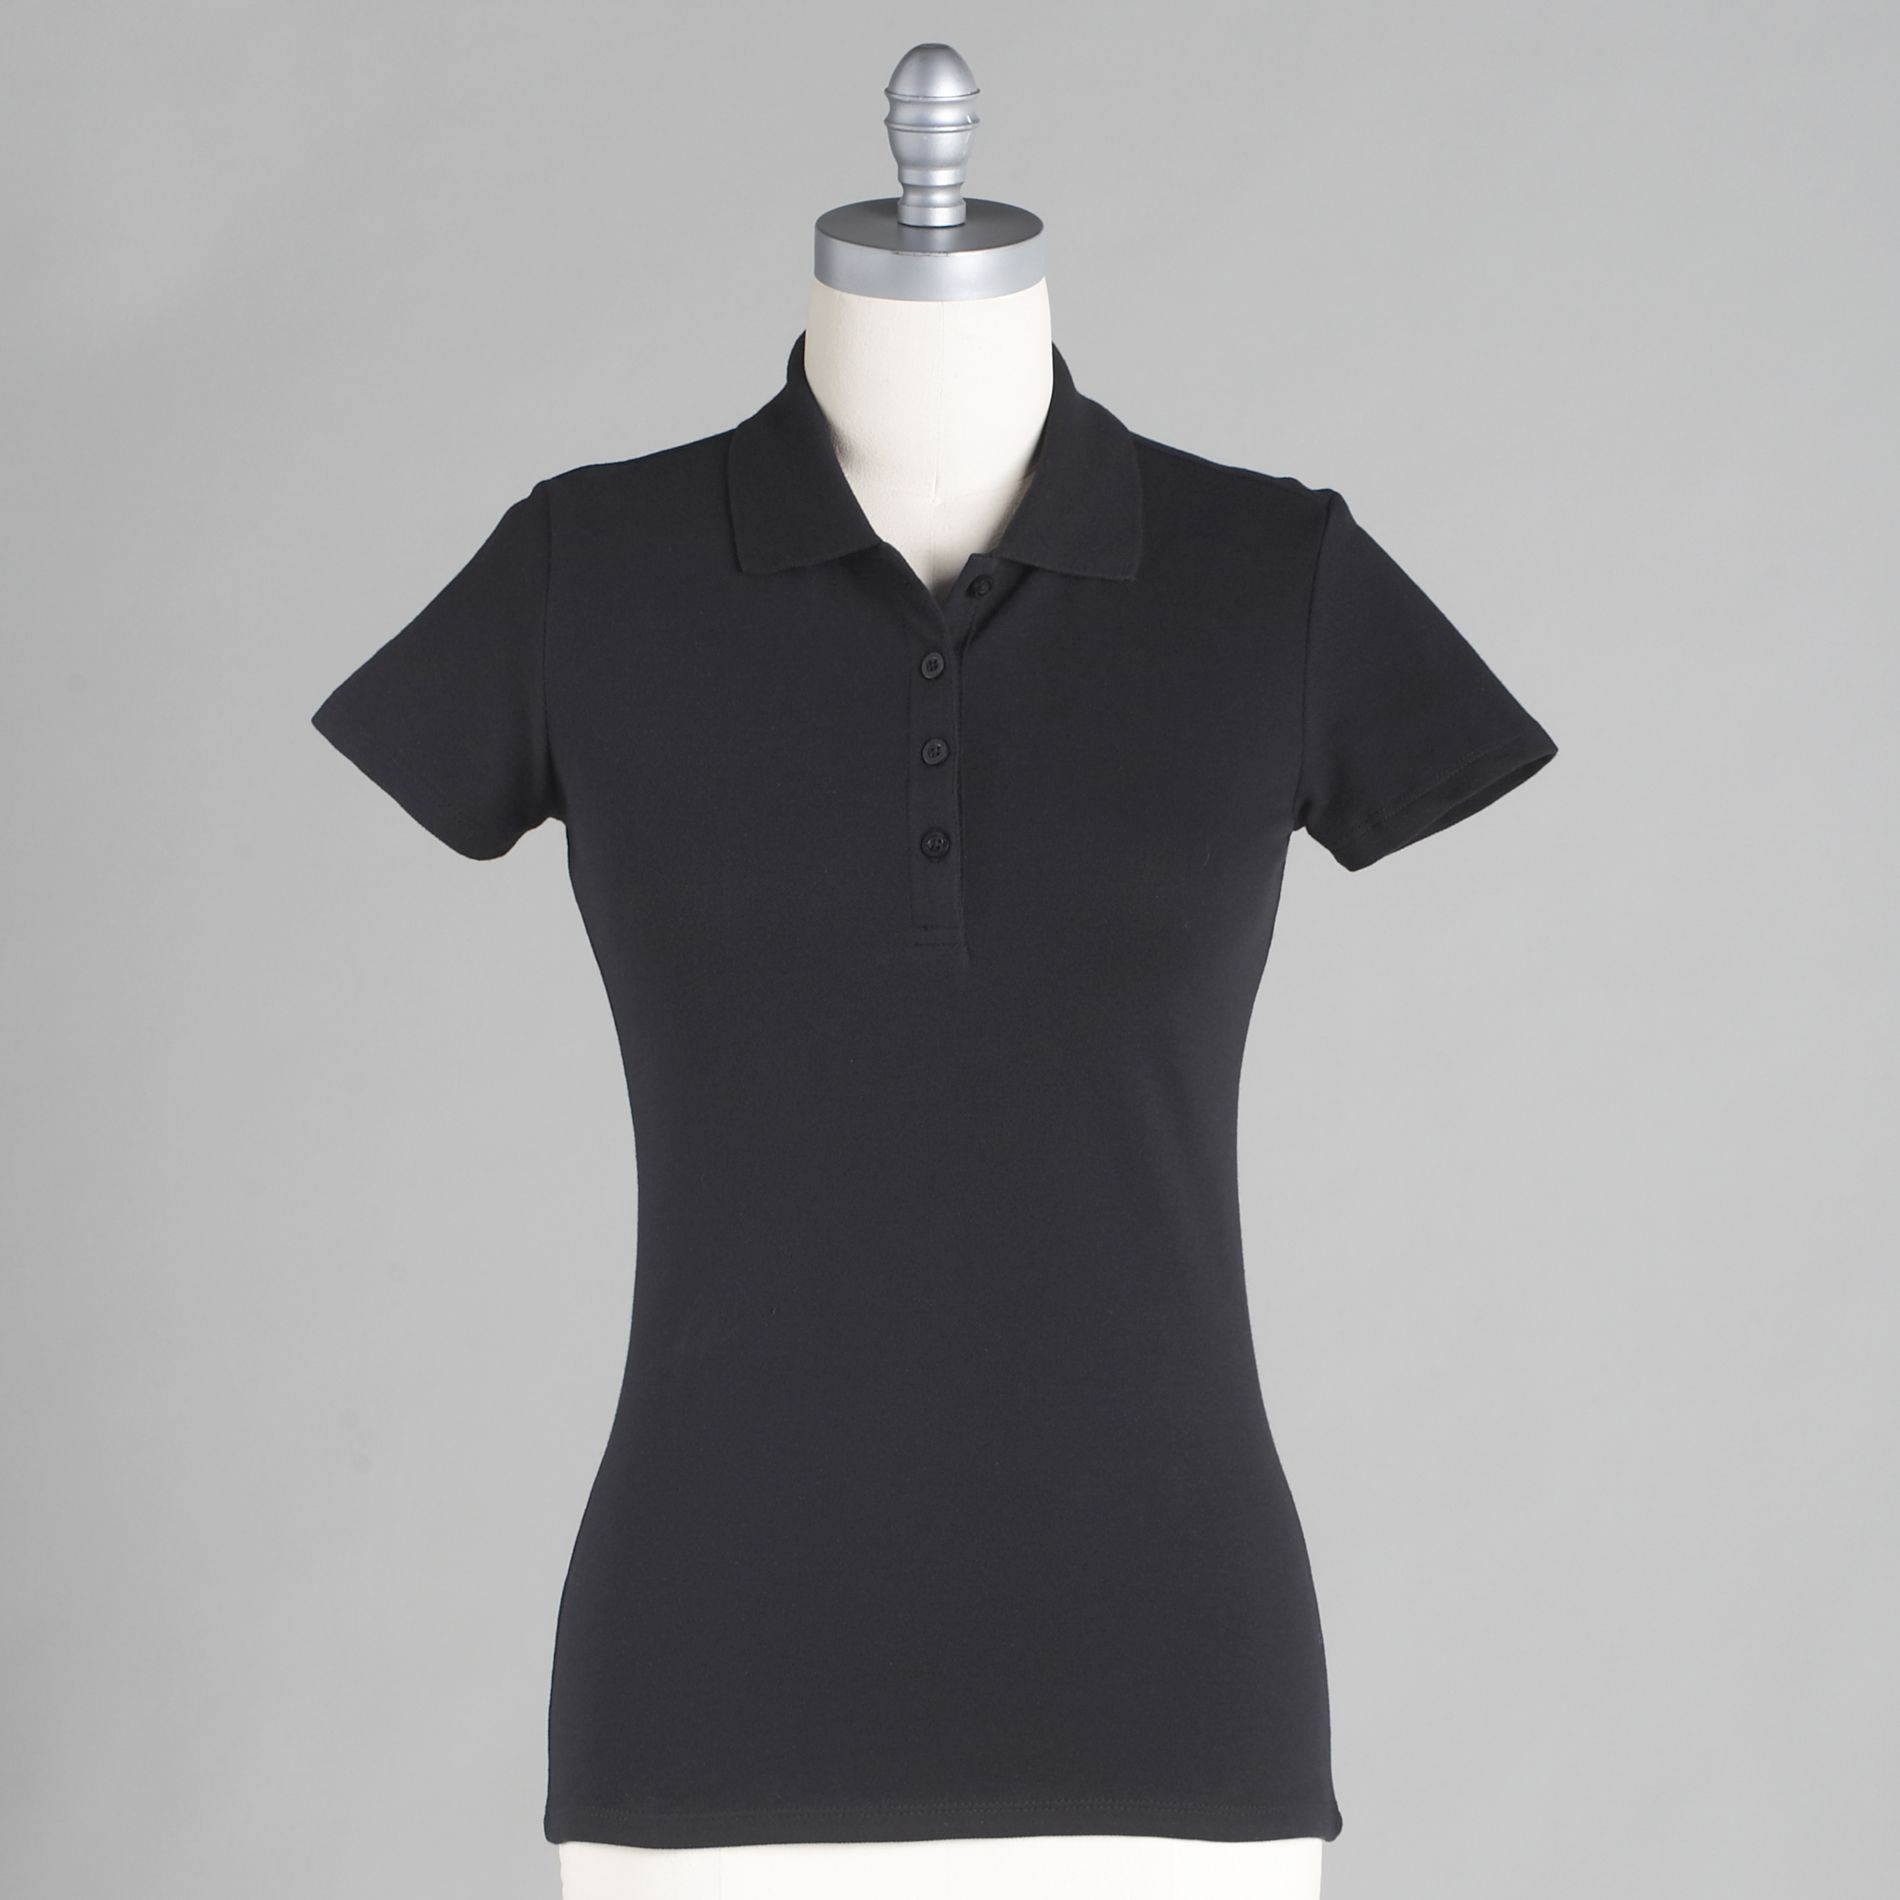 Southpole Junior's Basic Solid Pique Polo